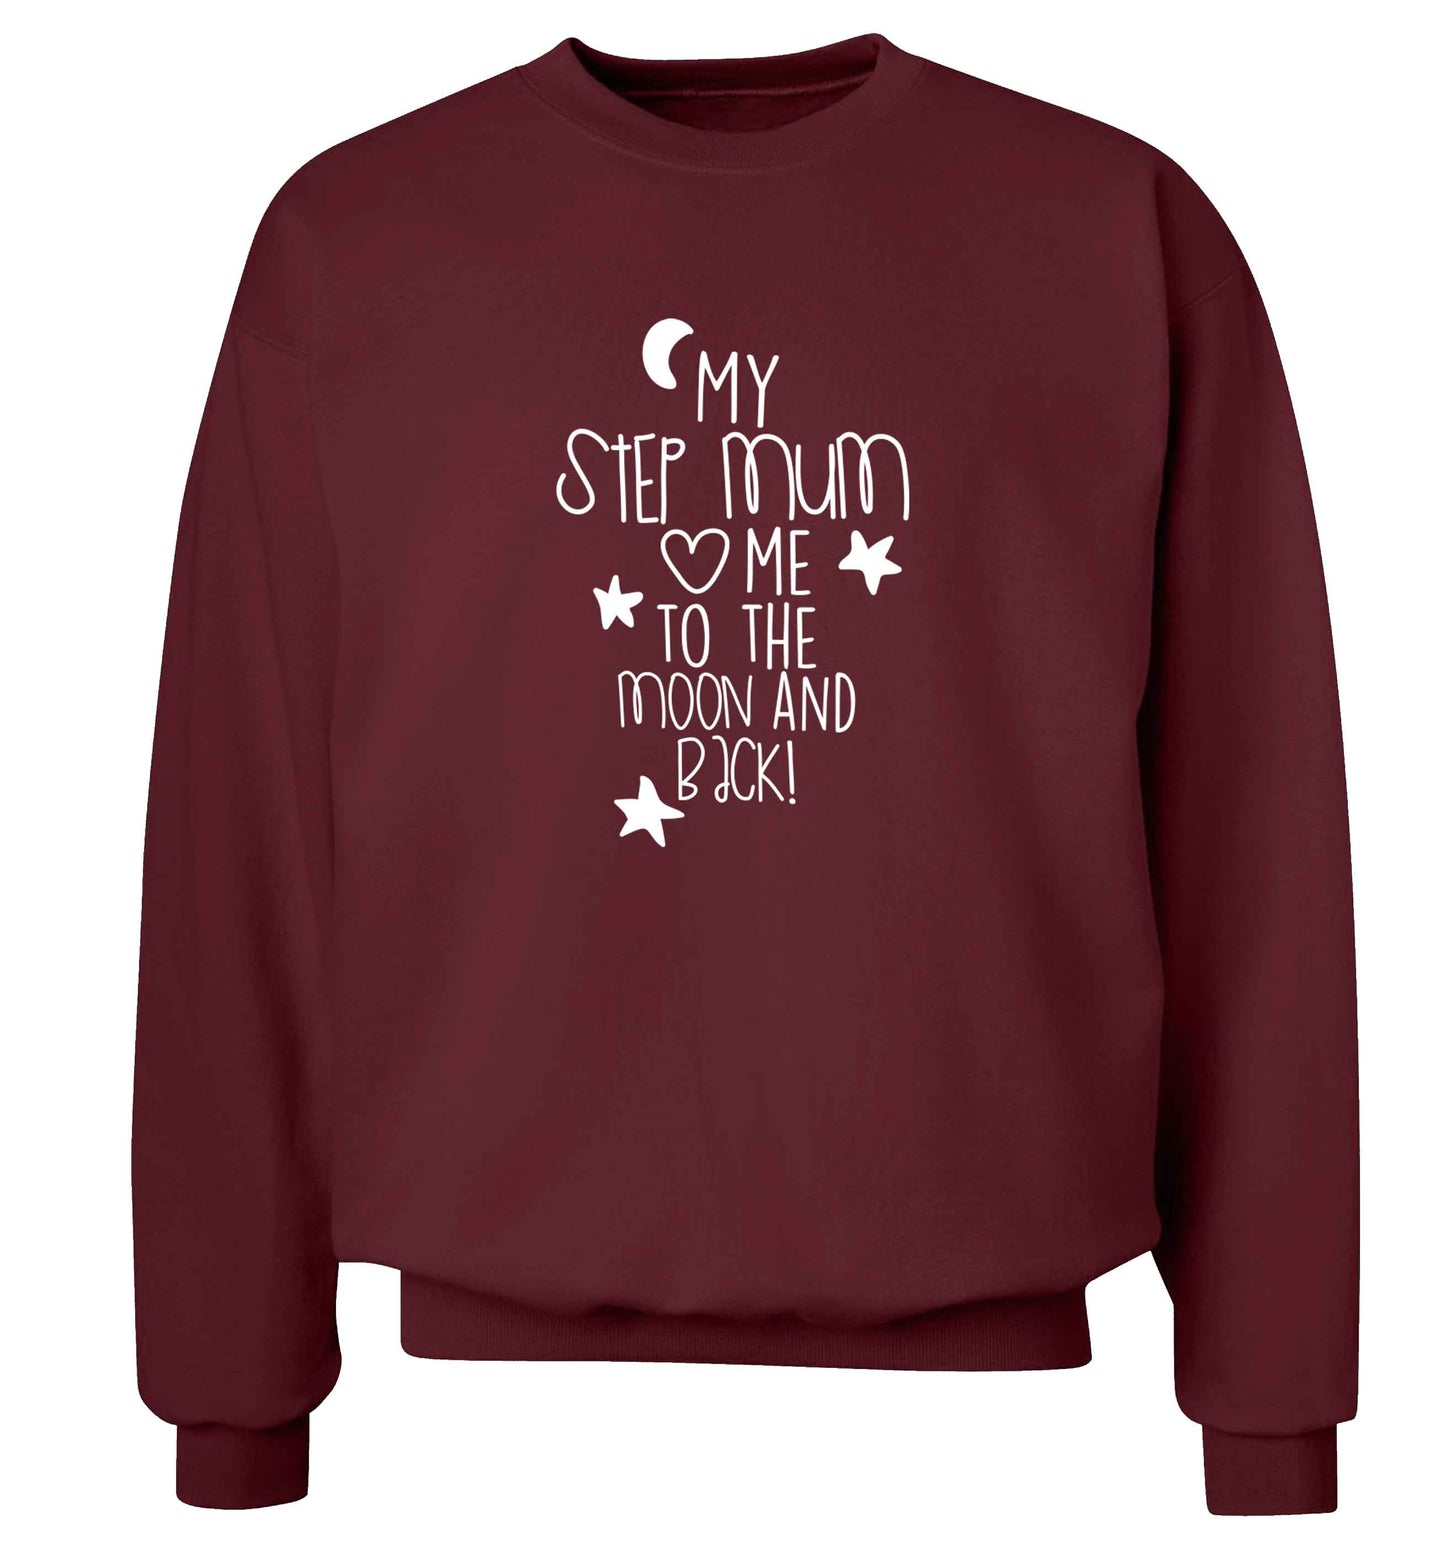 My step-mum loves me to the moon and back adult's unisex maroon sweater 2XL